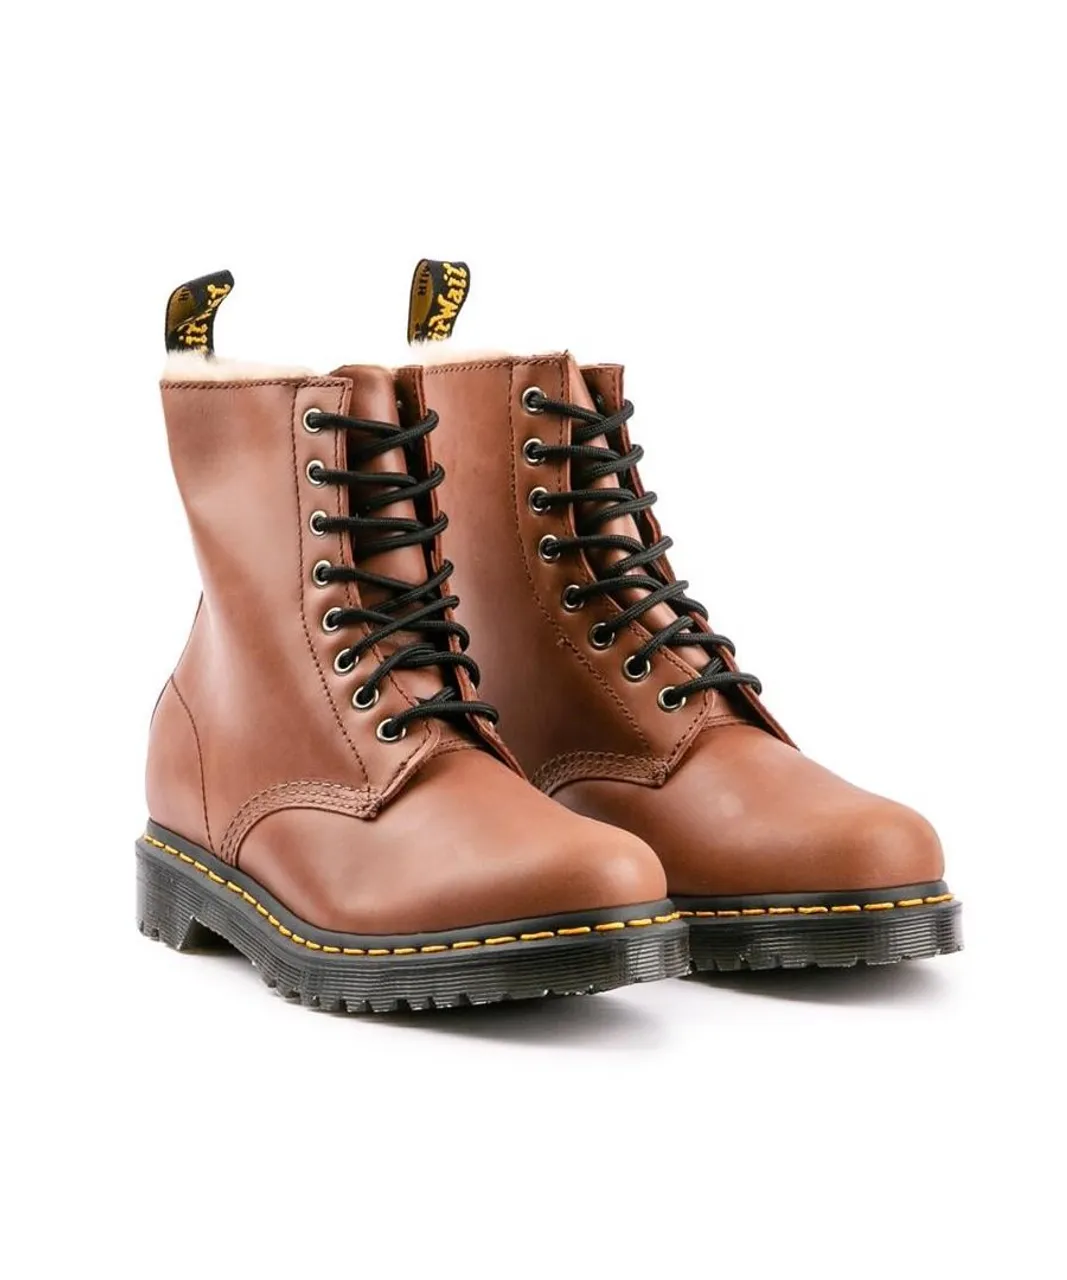 Dr Martens Womens 1460 Serena Boots - Brown